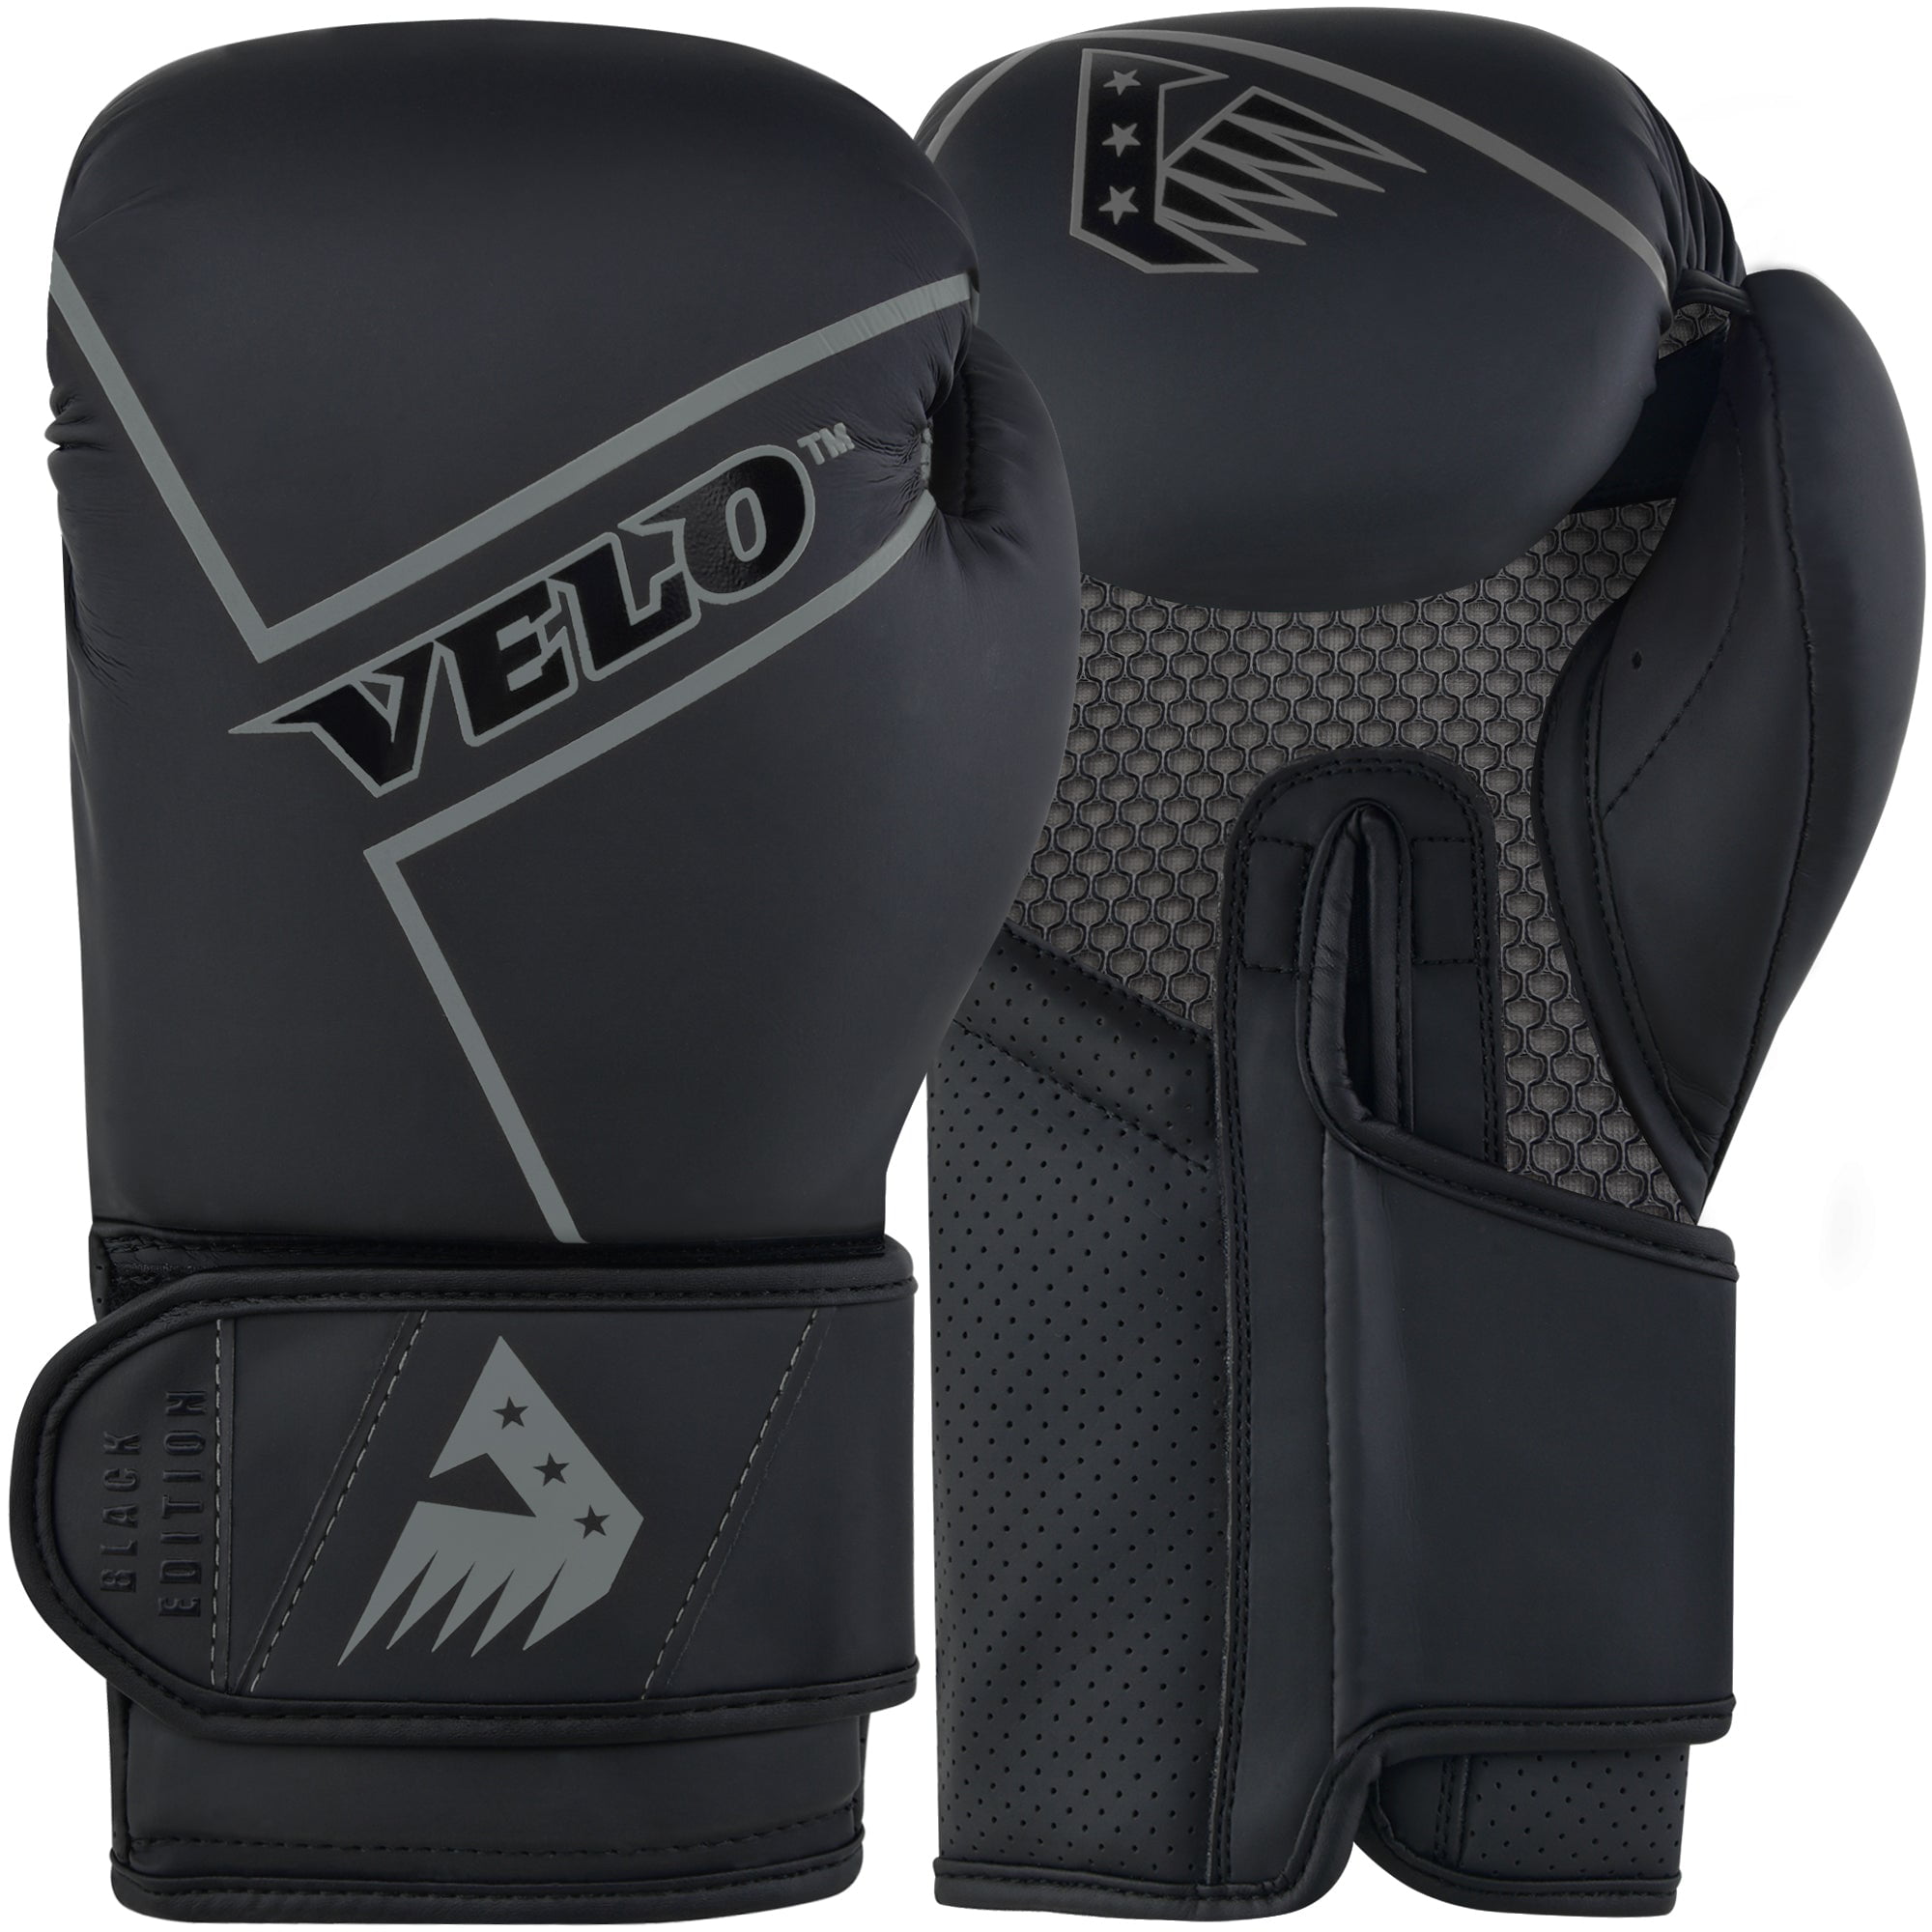 EMRAH Pro Leather Boxing Gloves,MMA,Sparring Punch Bag,Muay Thai Training Gloves 